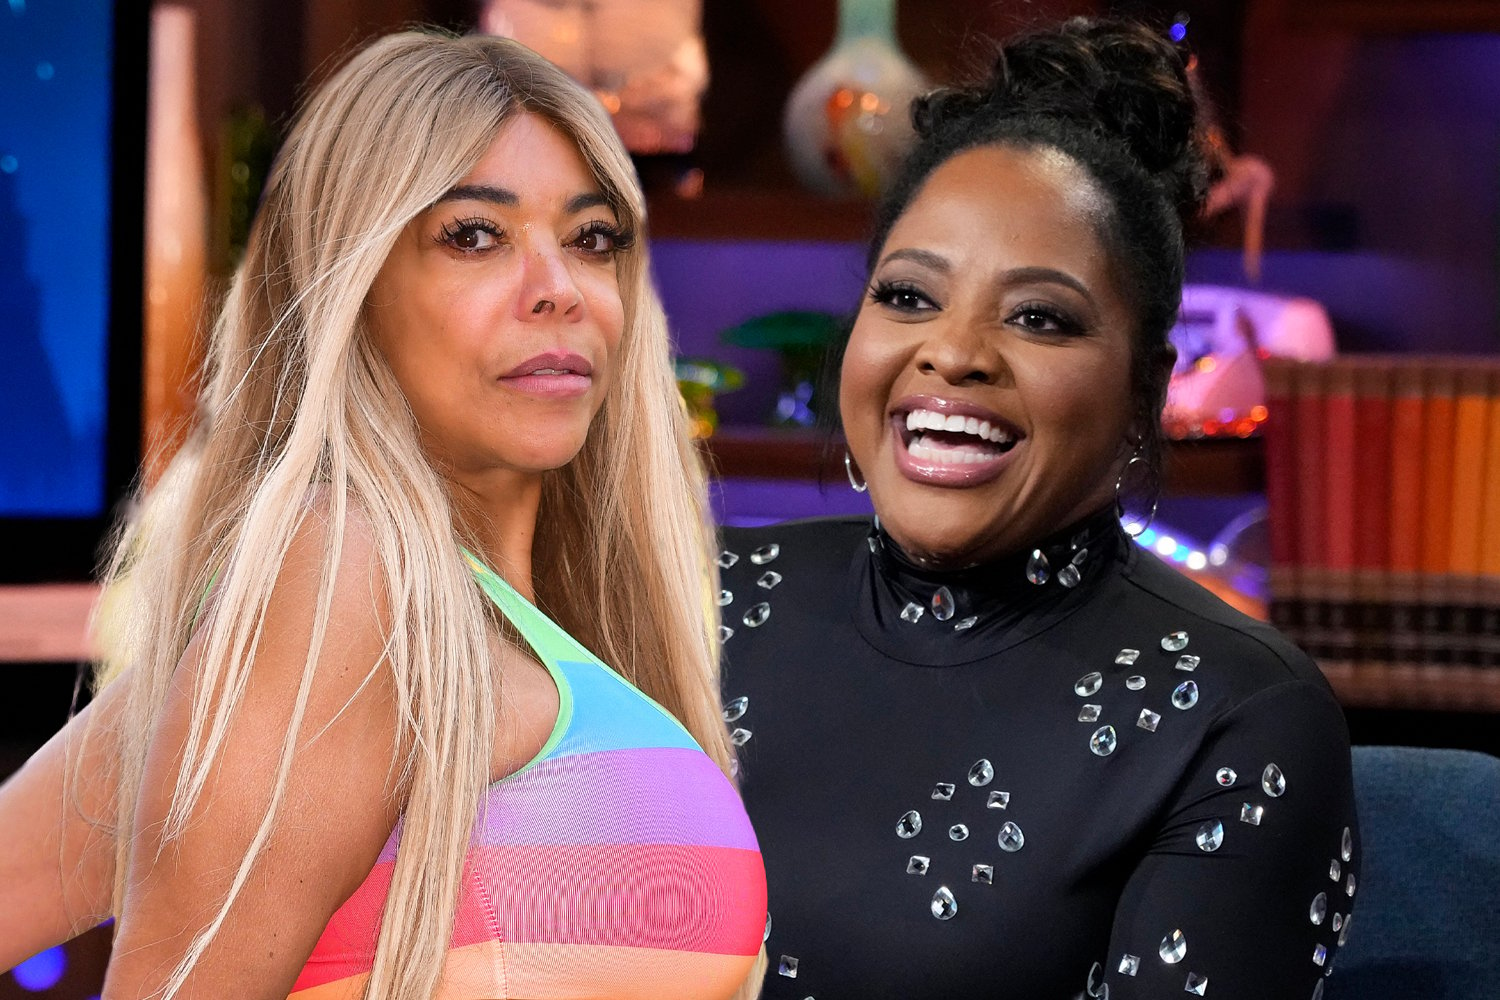 Wendy Williams in blonde straight hair and wearing a rainbow top in a superimposed photo of Sherri Shepherd smiling and wearing a black dress on the set of 'Watch What Happens Live'